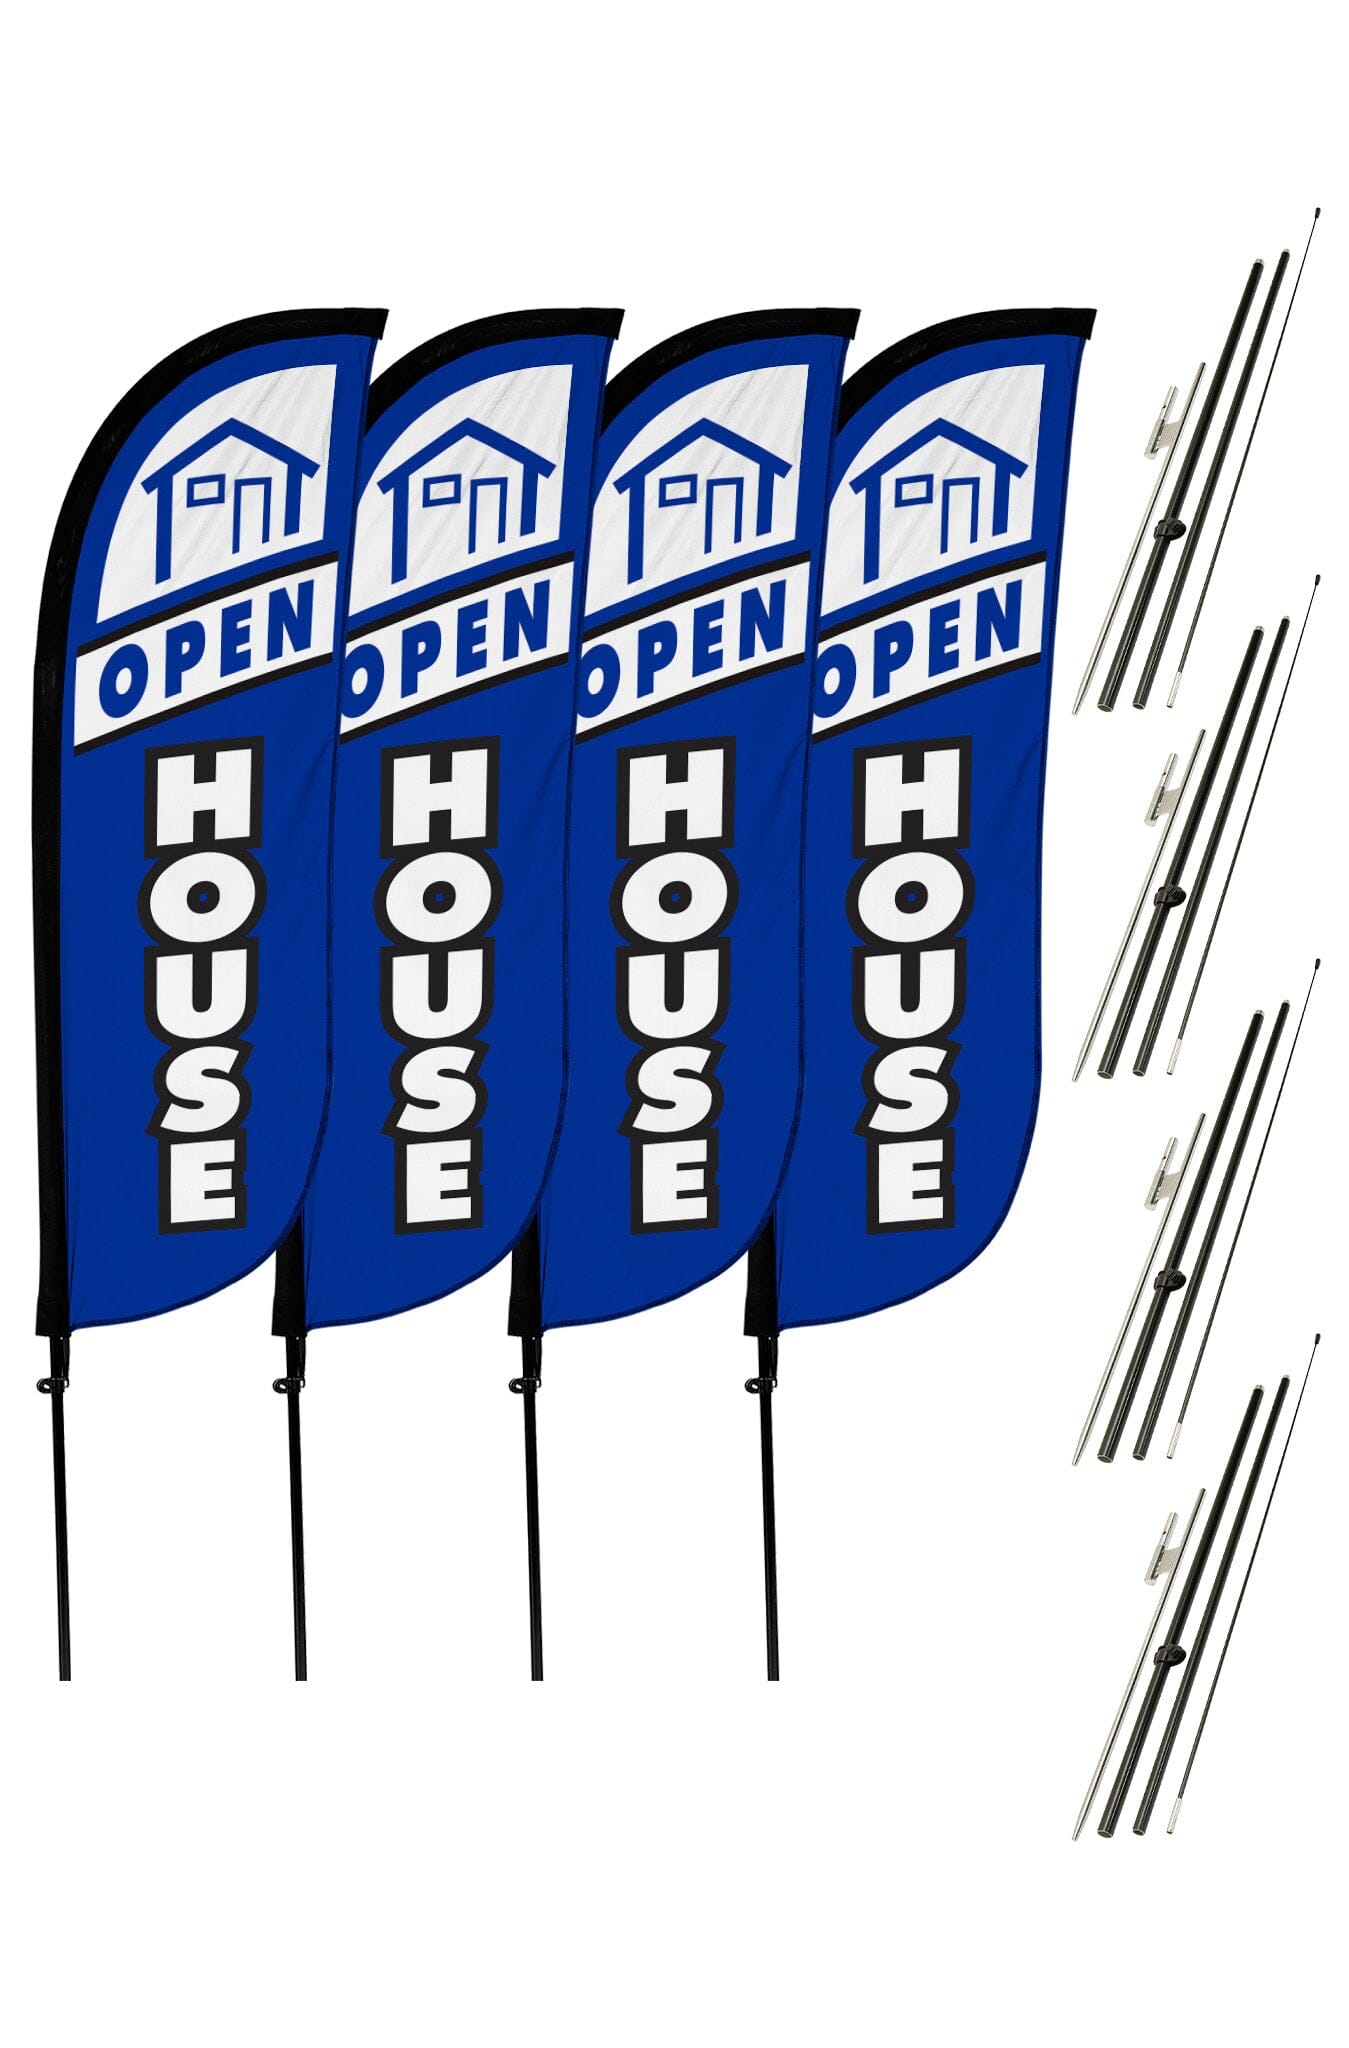 Open House Feather Flag - 4 Pack w/ Ground Spike Pole Set 10M5000079X4GSET